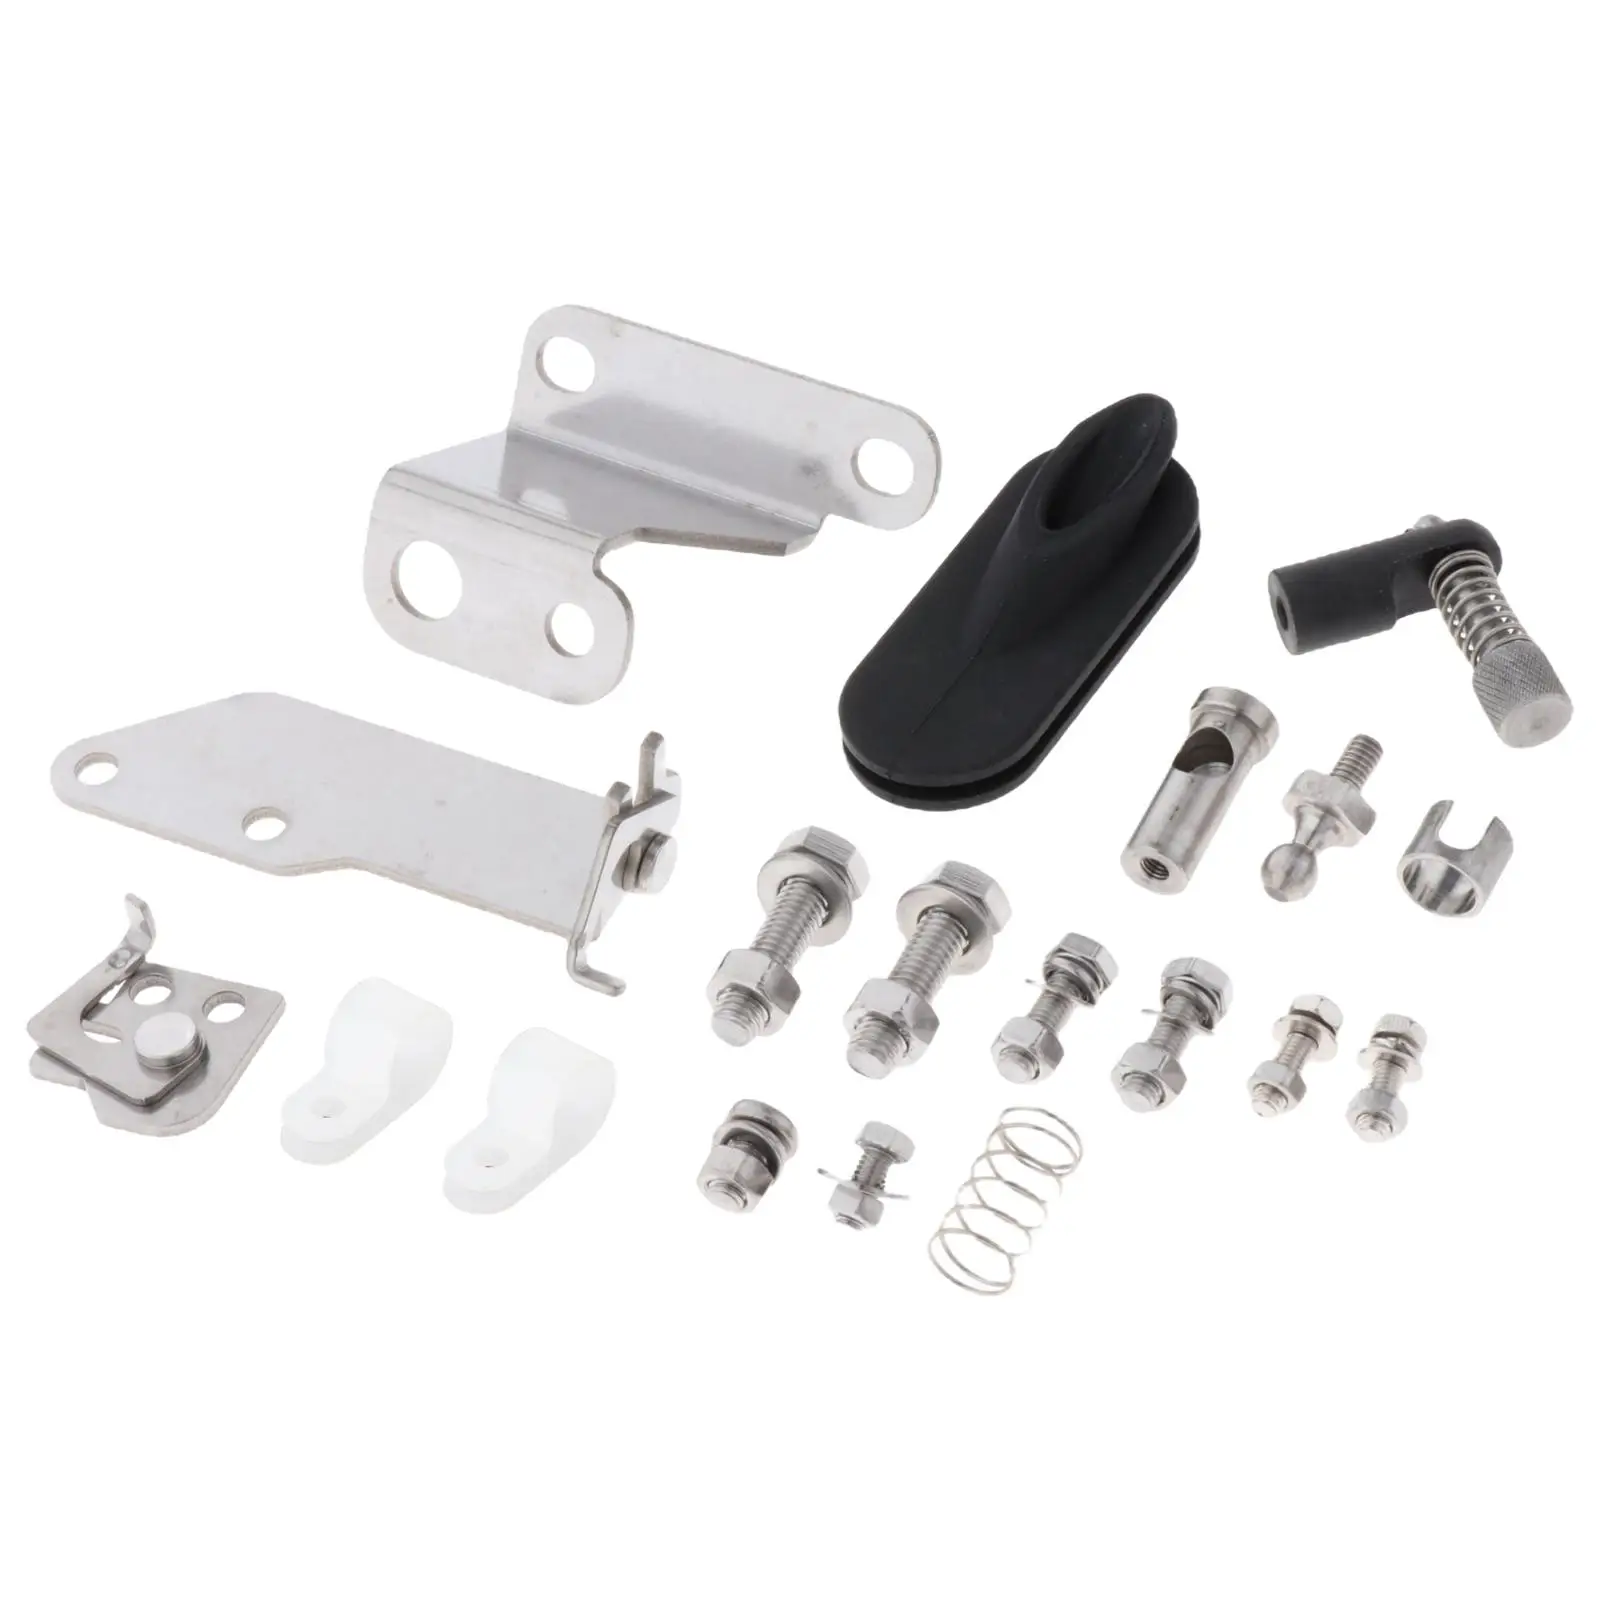 Remote Control Fitting Kit 3A1-83880-1 for Tohatsu Outboard Motor Direct Replaces